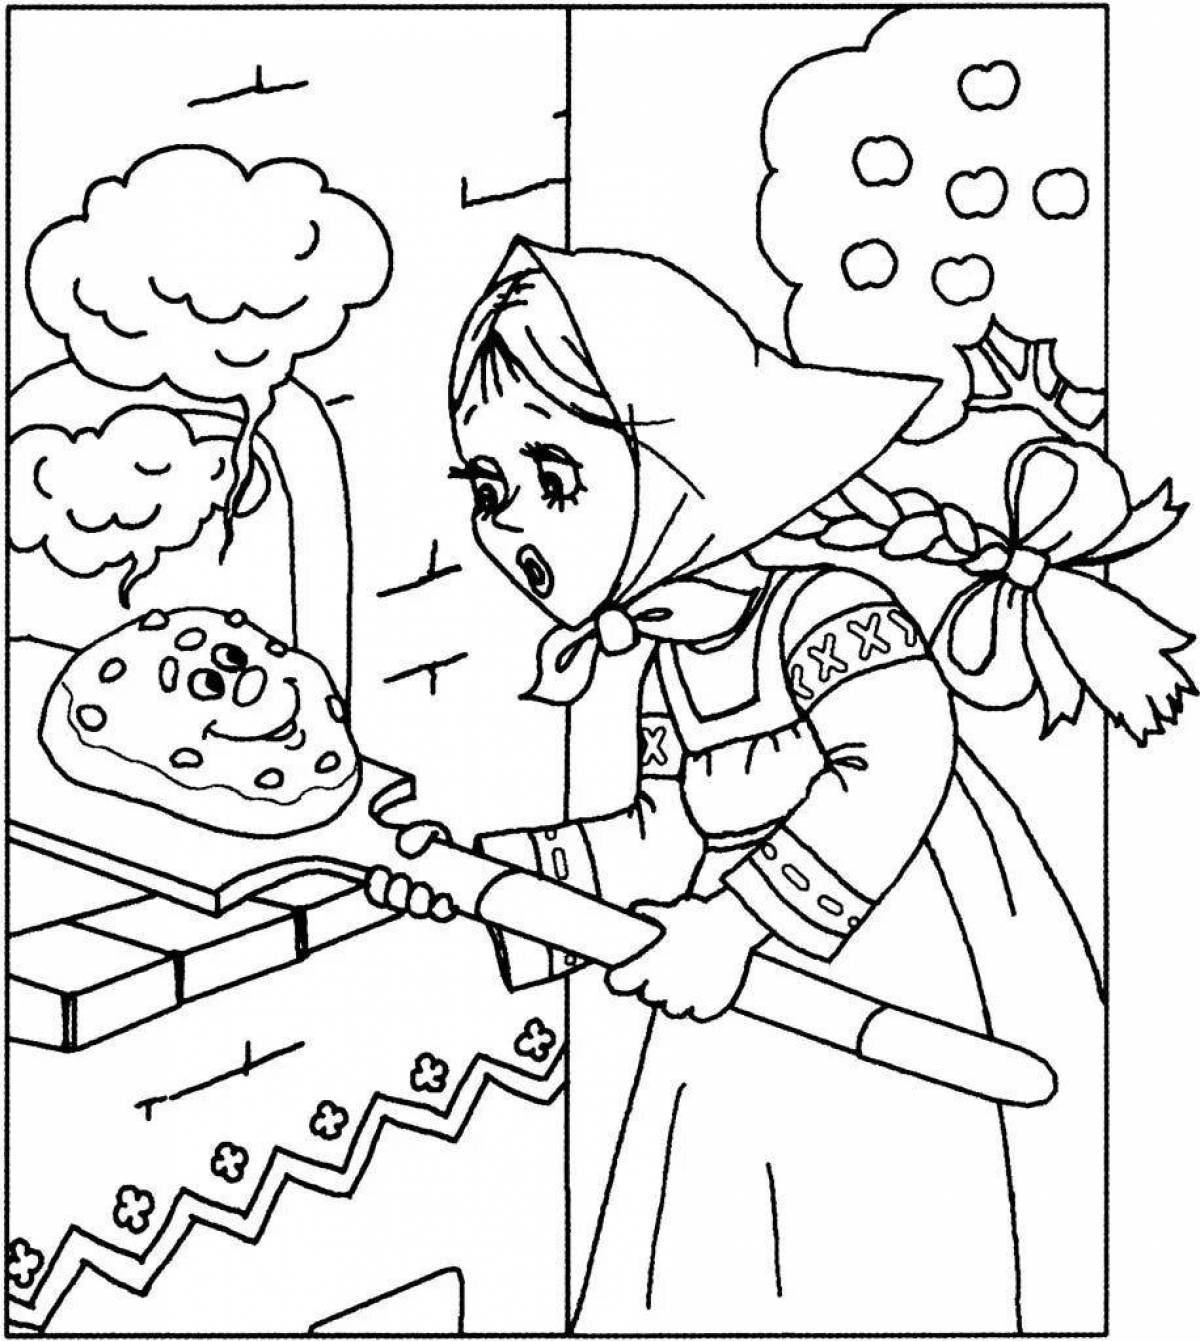 Coloring page luxury mistress blizzard